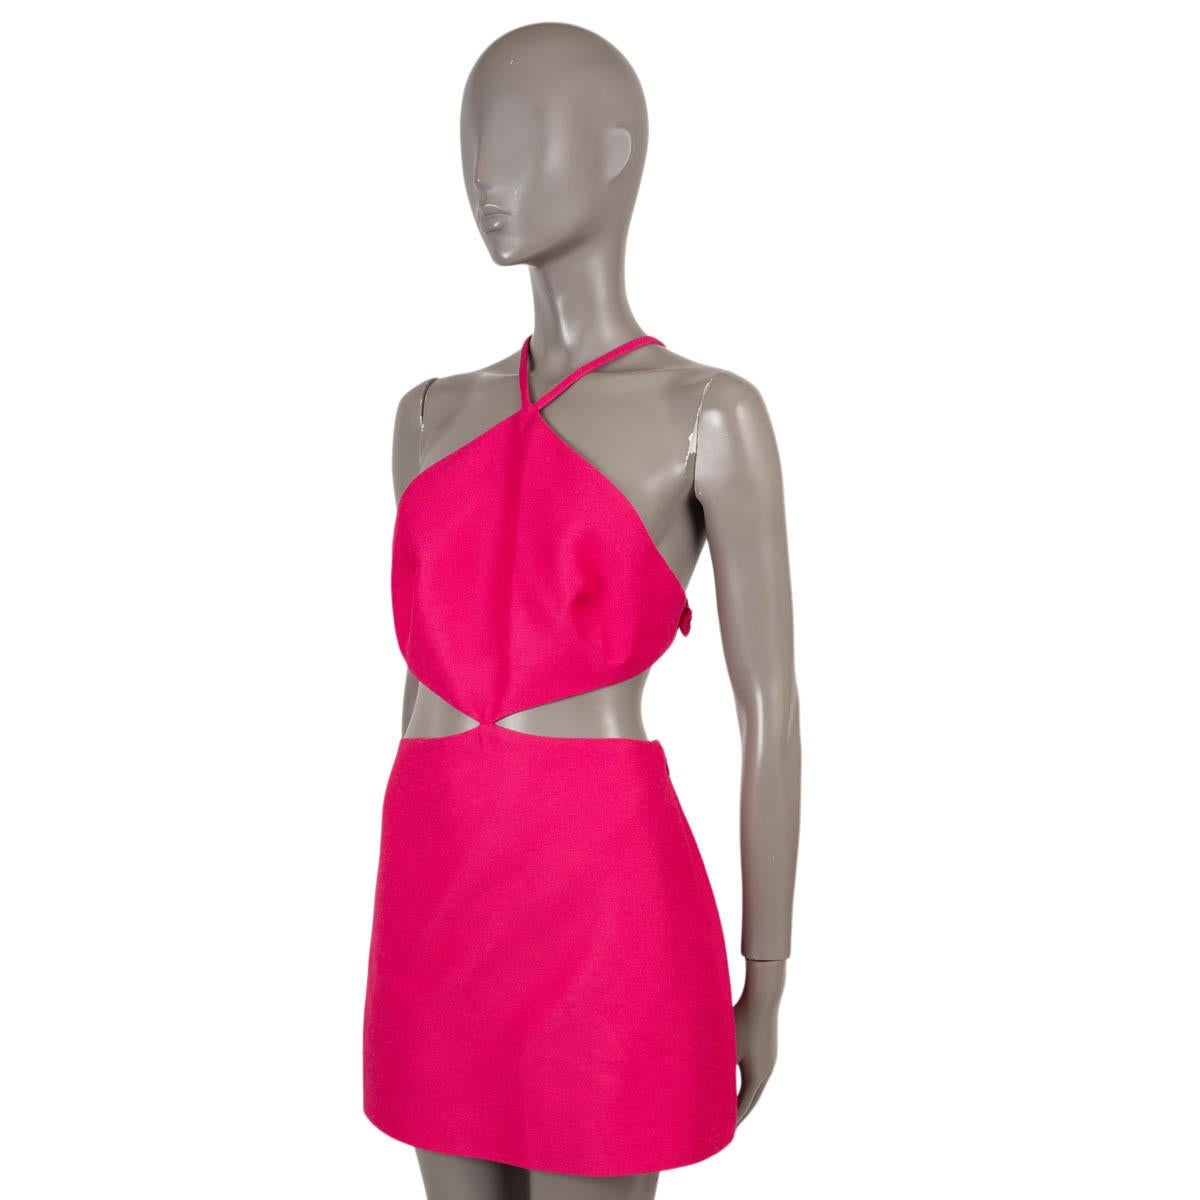 100% authentic Valentino cut-out crêpe mini dress in fuchsia viscose (54%), cotton (36%) and silk (10%). Features four bows on the back and strap. Closes with a zipper and hook on the side lined in viscose (91%) and elasthanne (9%).  Has been worn